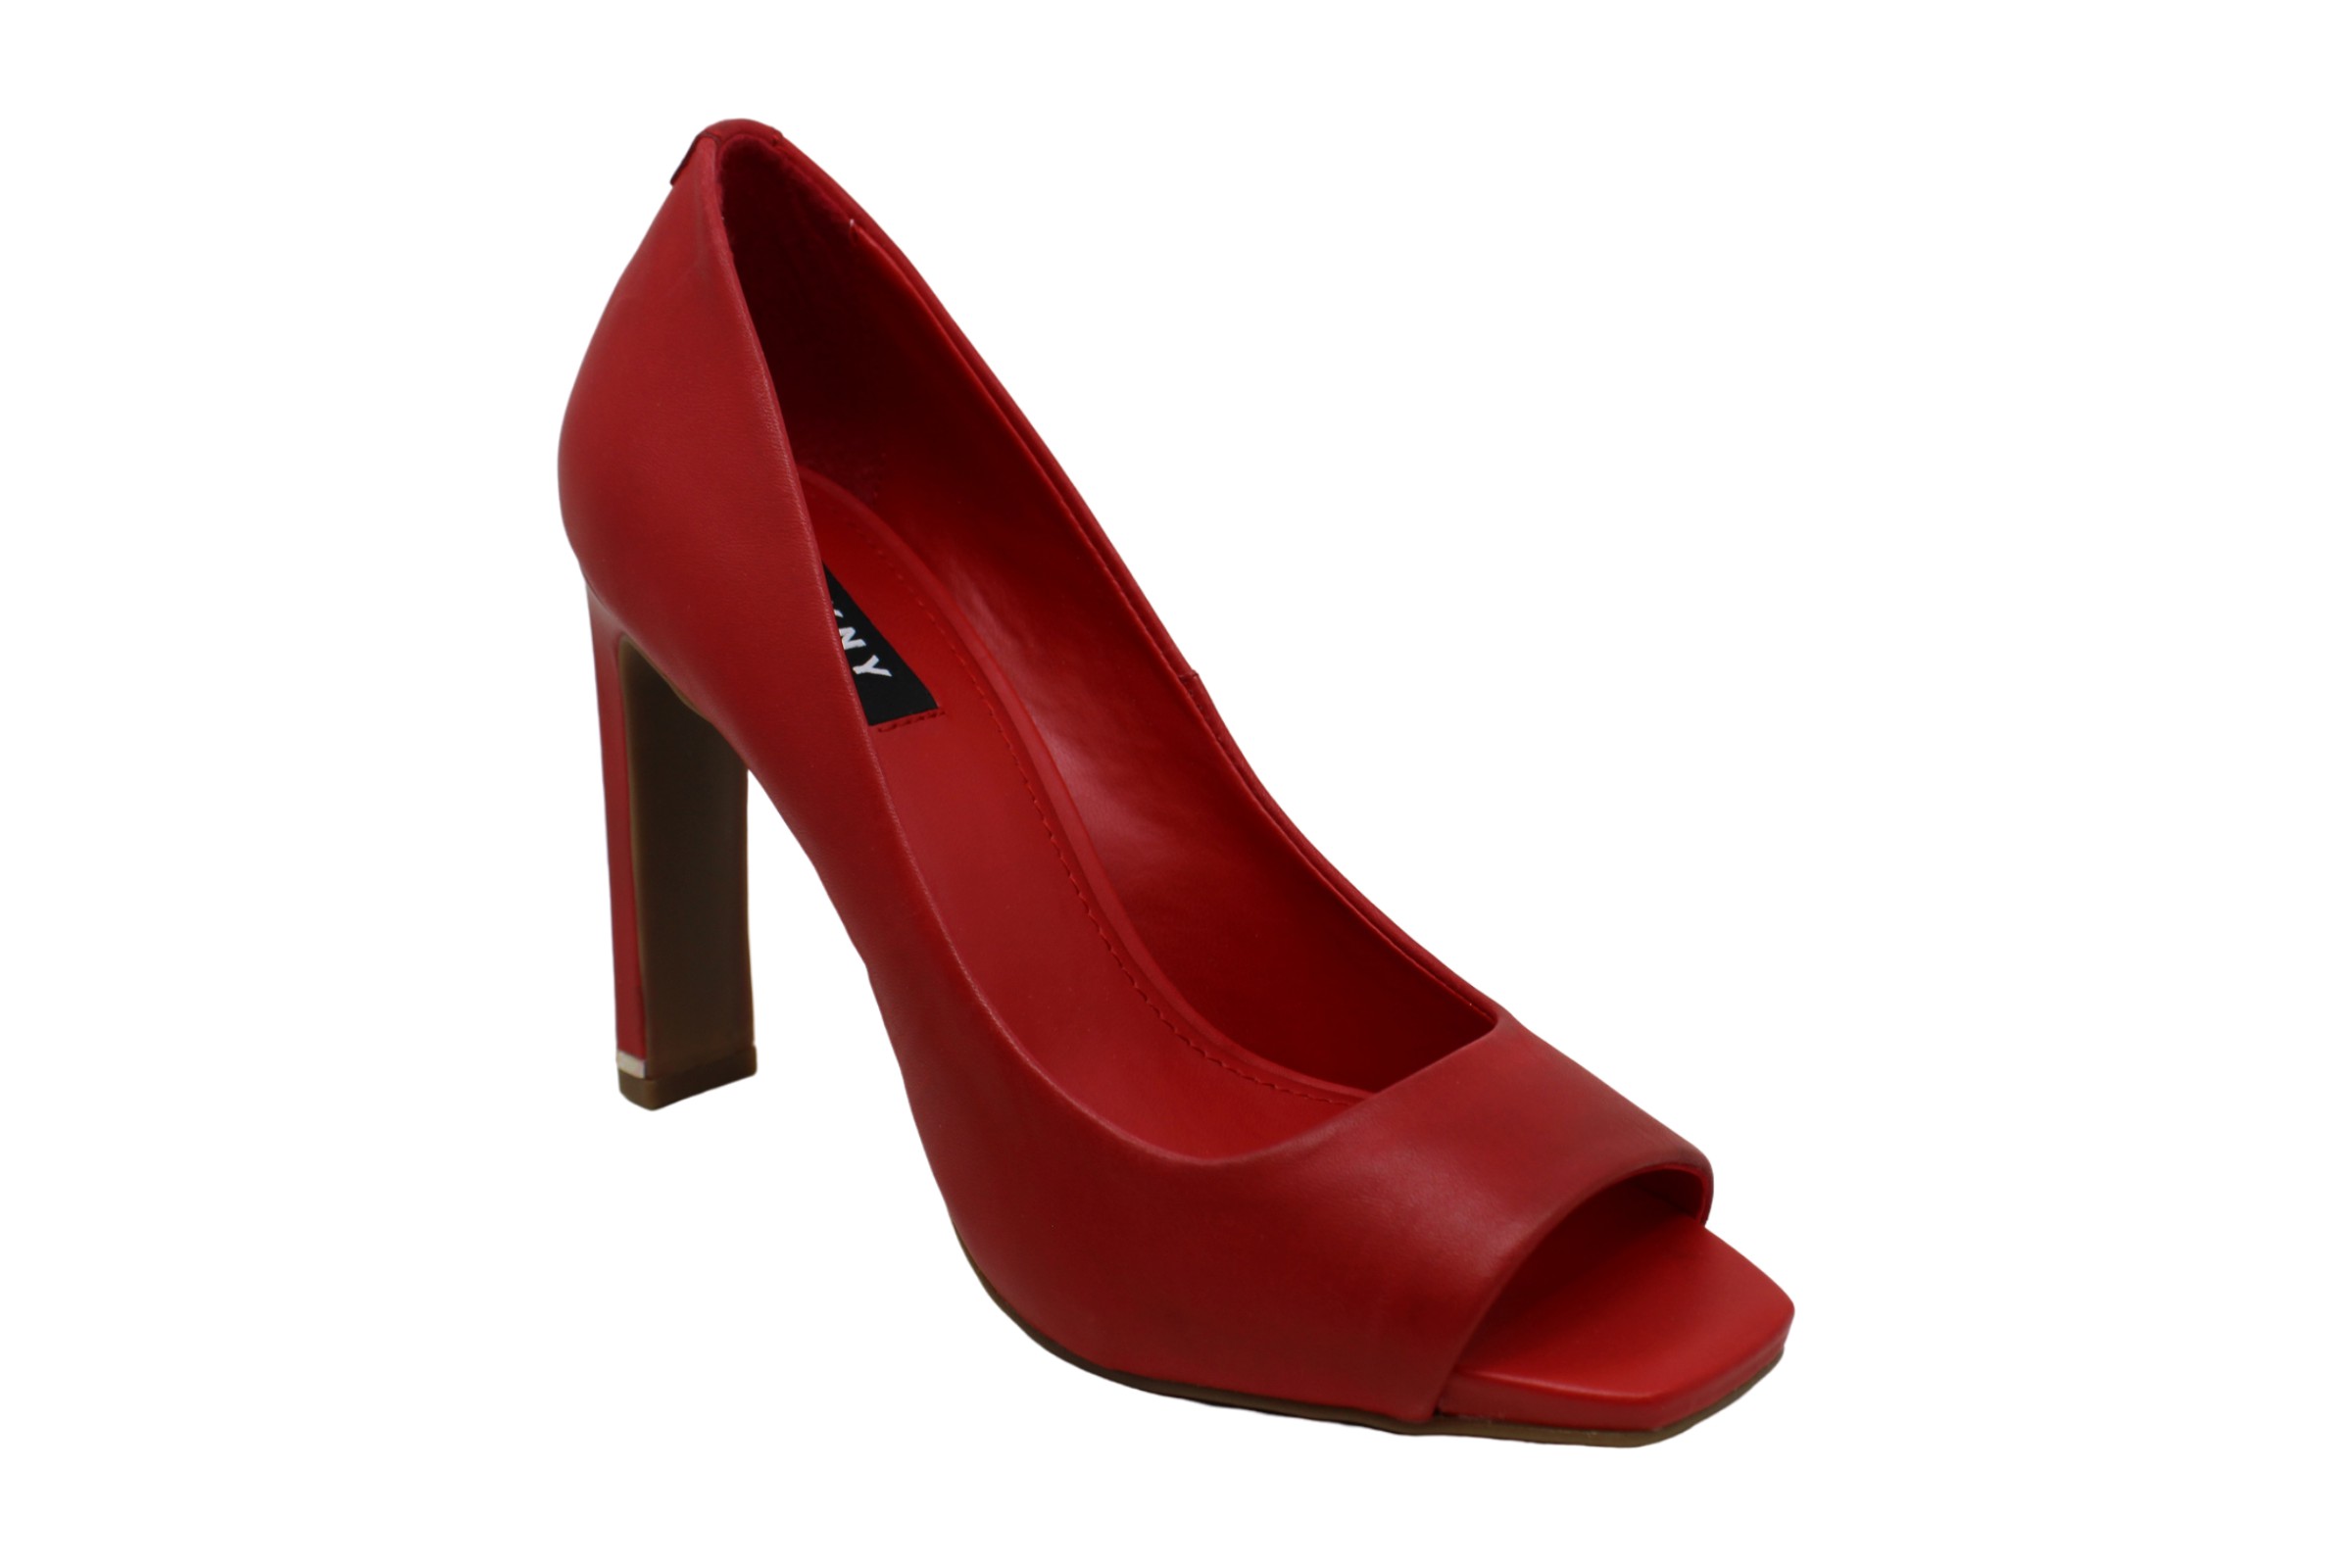 DKNY Womens Claudia Leather Peep Toe Classic Pumps, Red, Size 8.0 0JC8